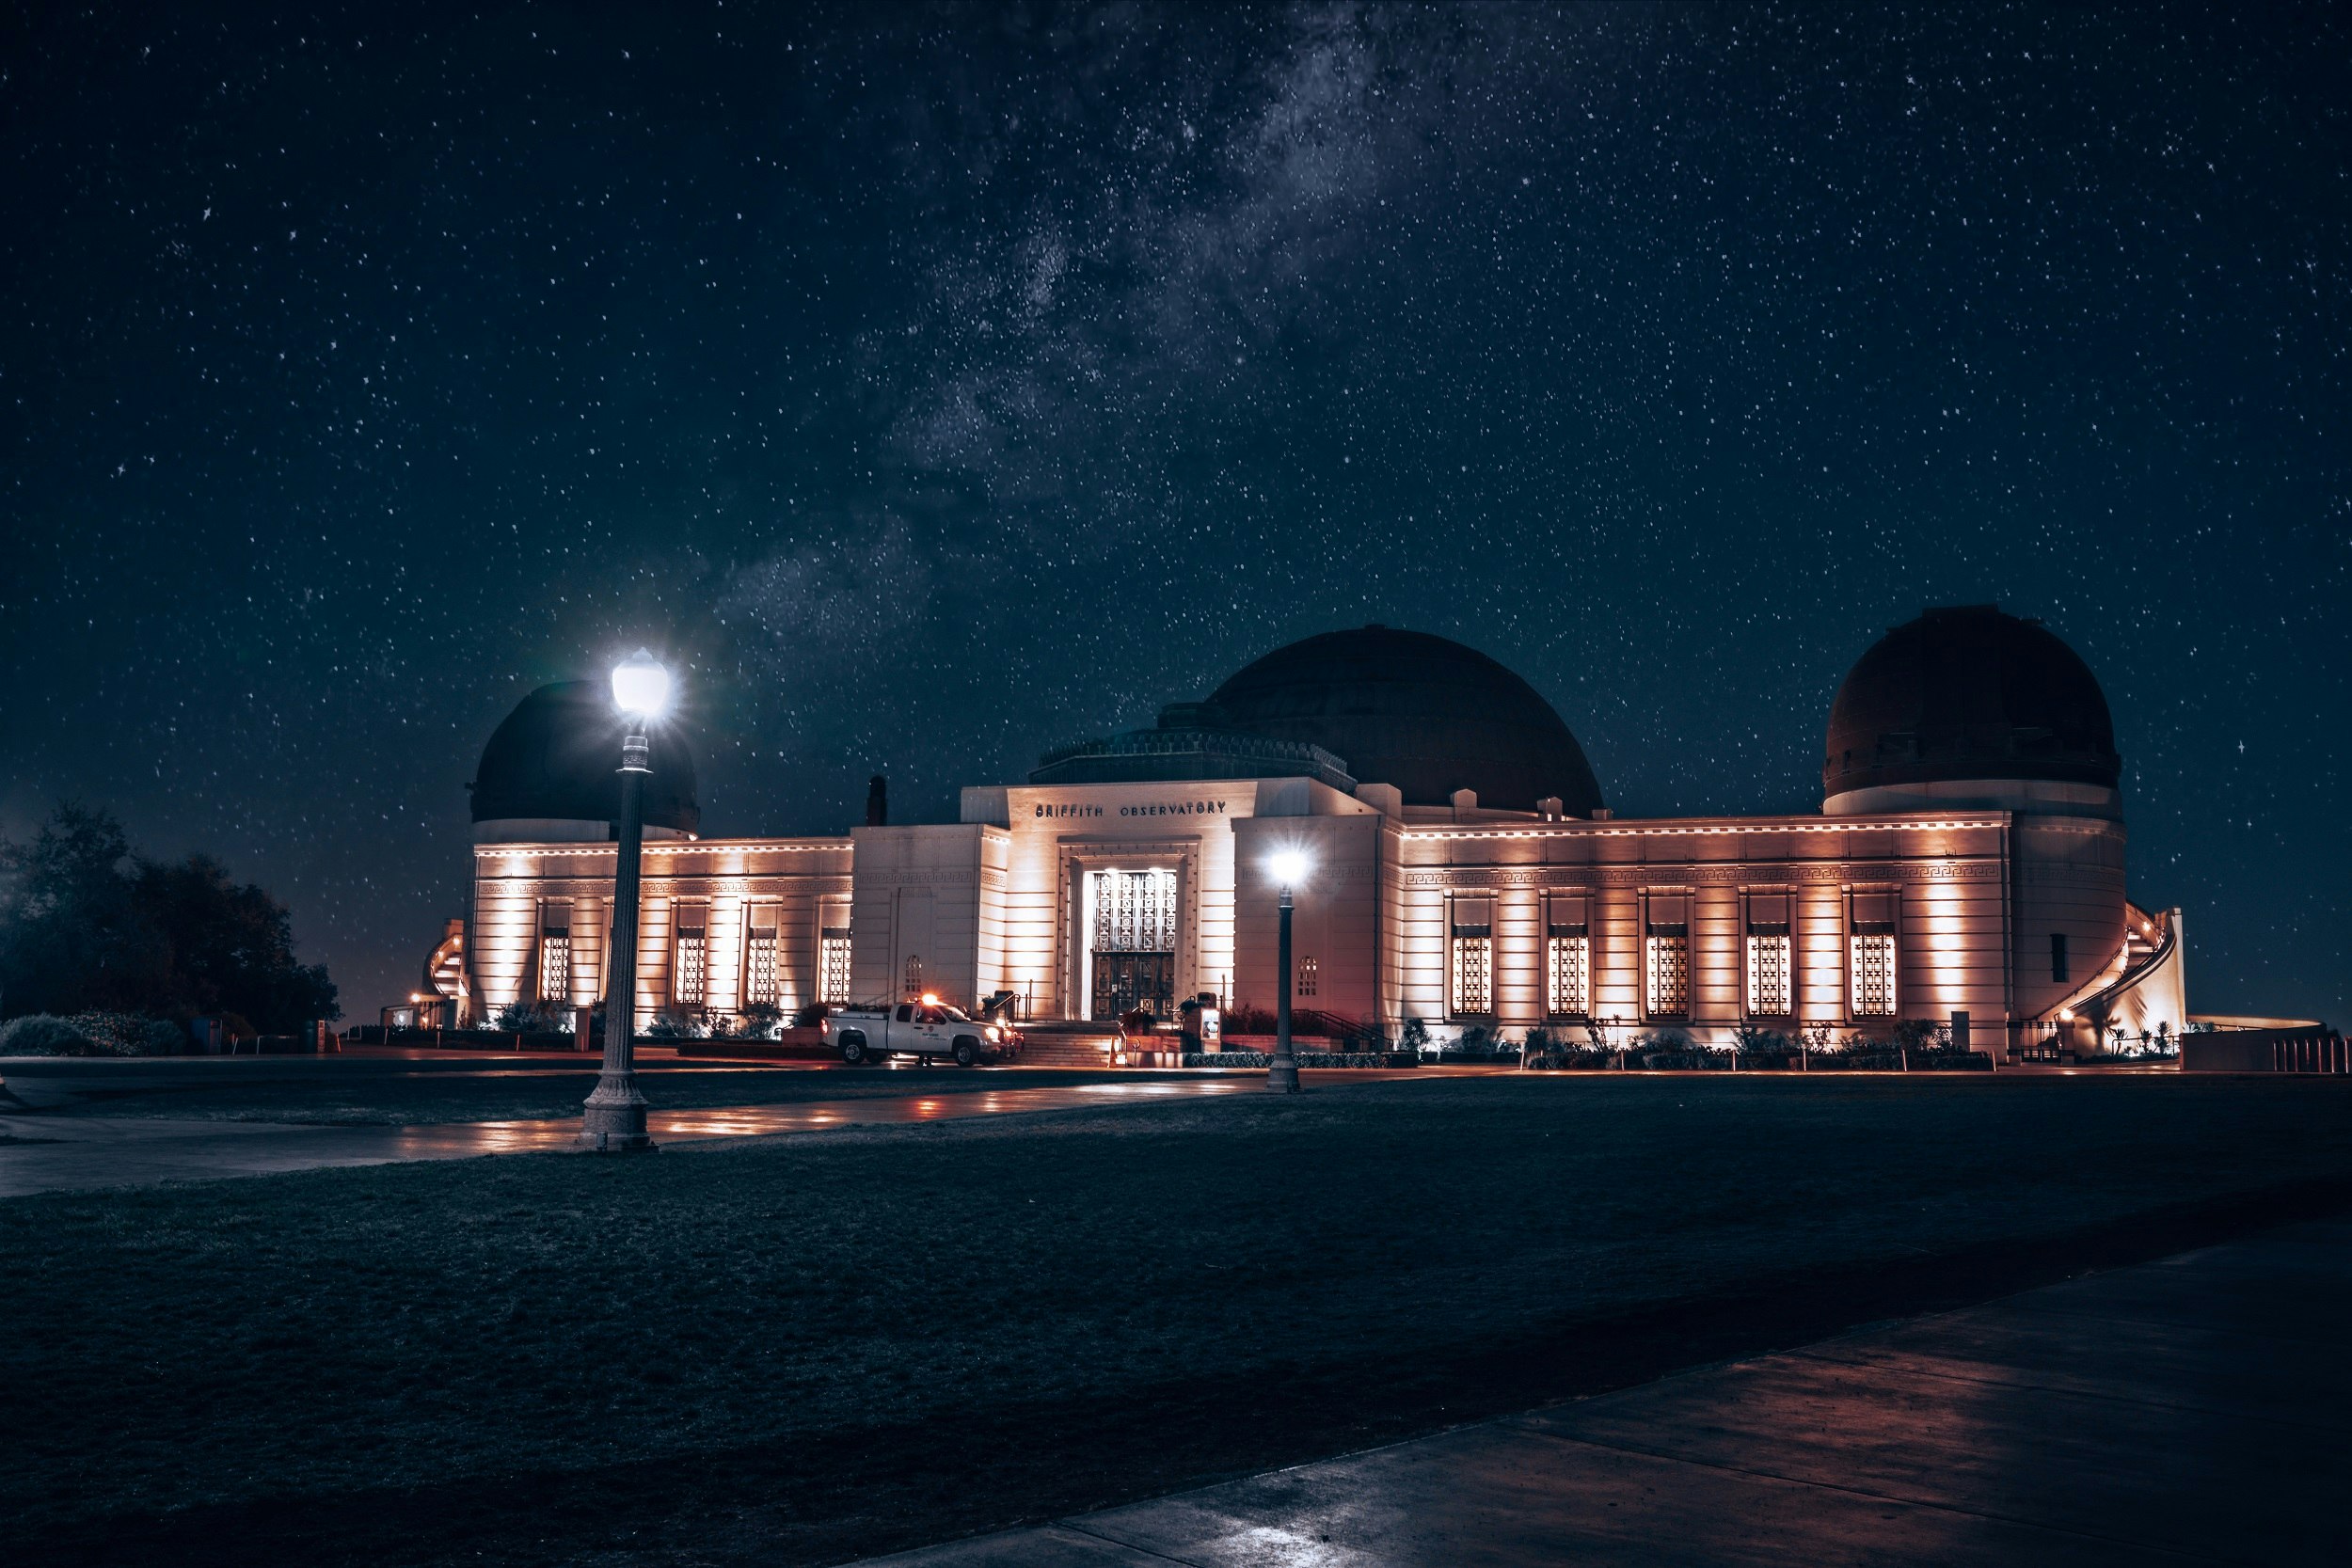 The art deco facade of the Griffith Observatory is let up at night, with the Milky Way splashed across the night sky behind it.